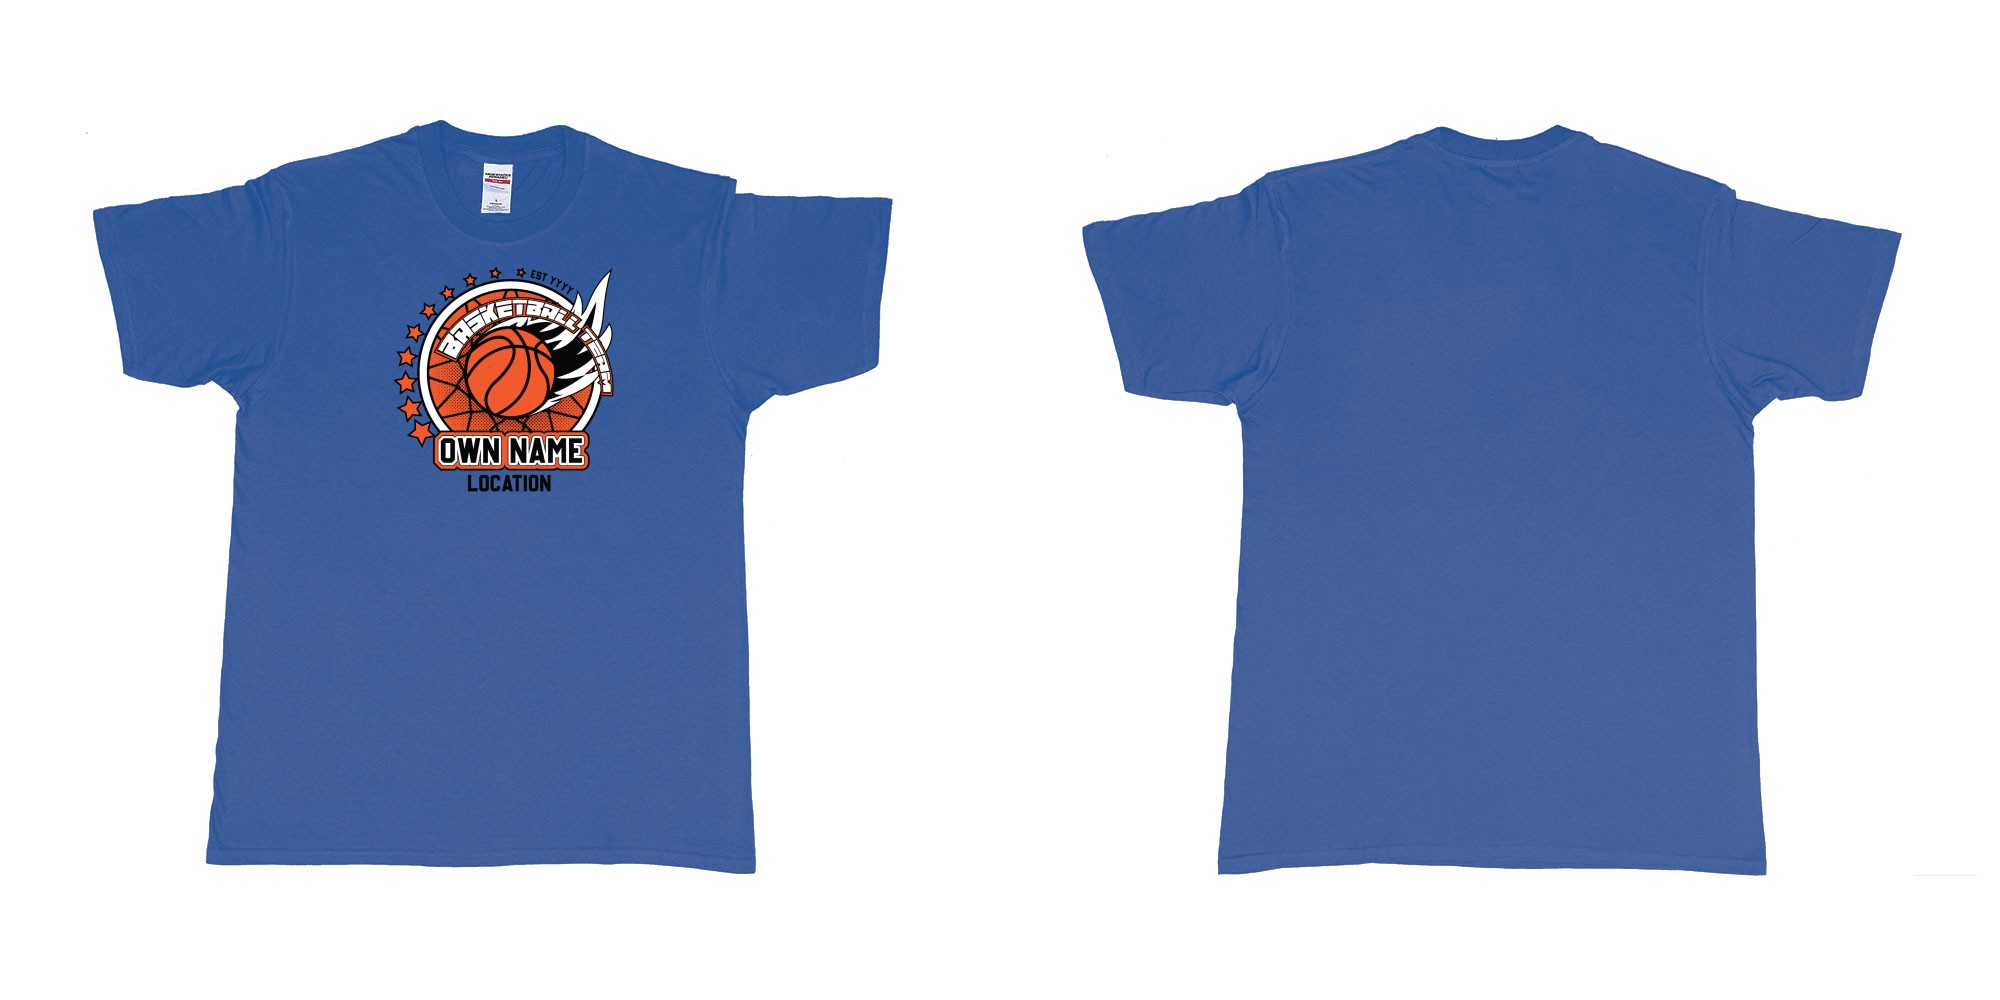 Custom tshirt design basketball team own name location established year custom design production bali in fabric color royal-blue choice your own text made in Bali by The Pirate Way